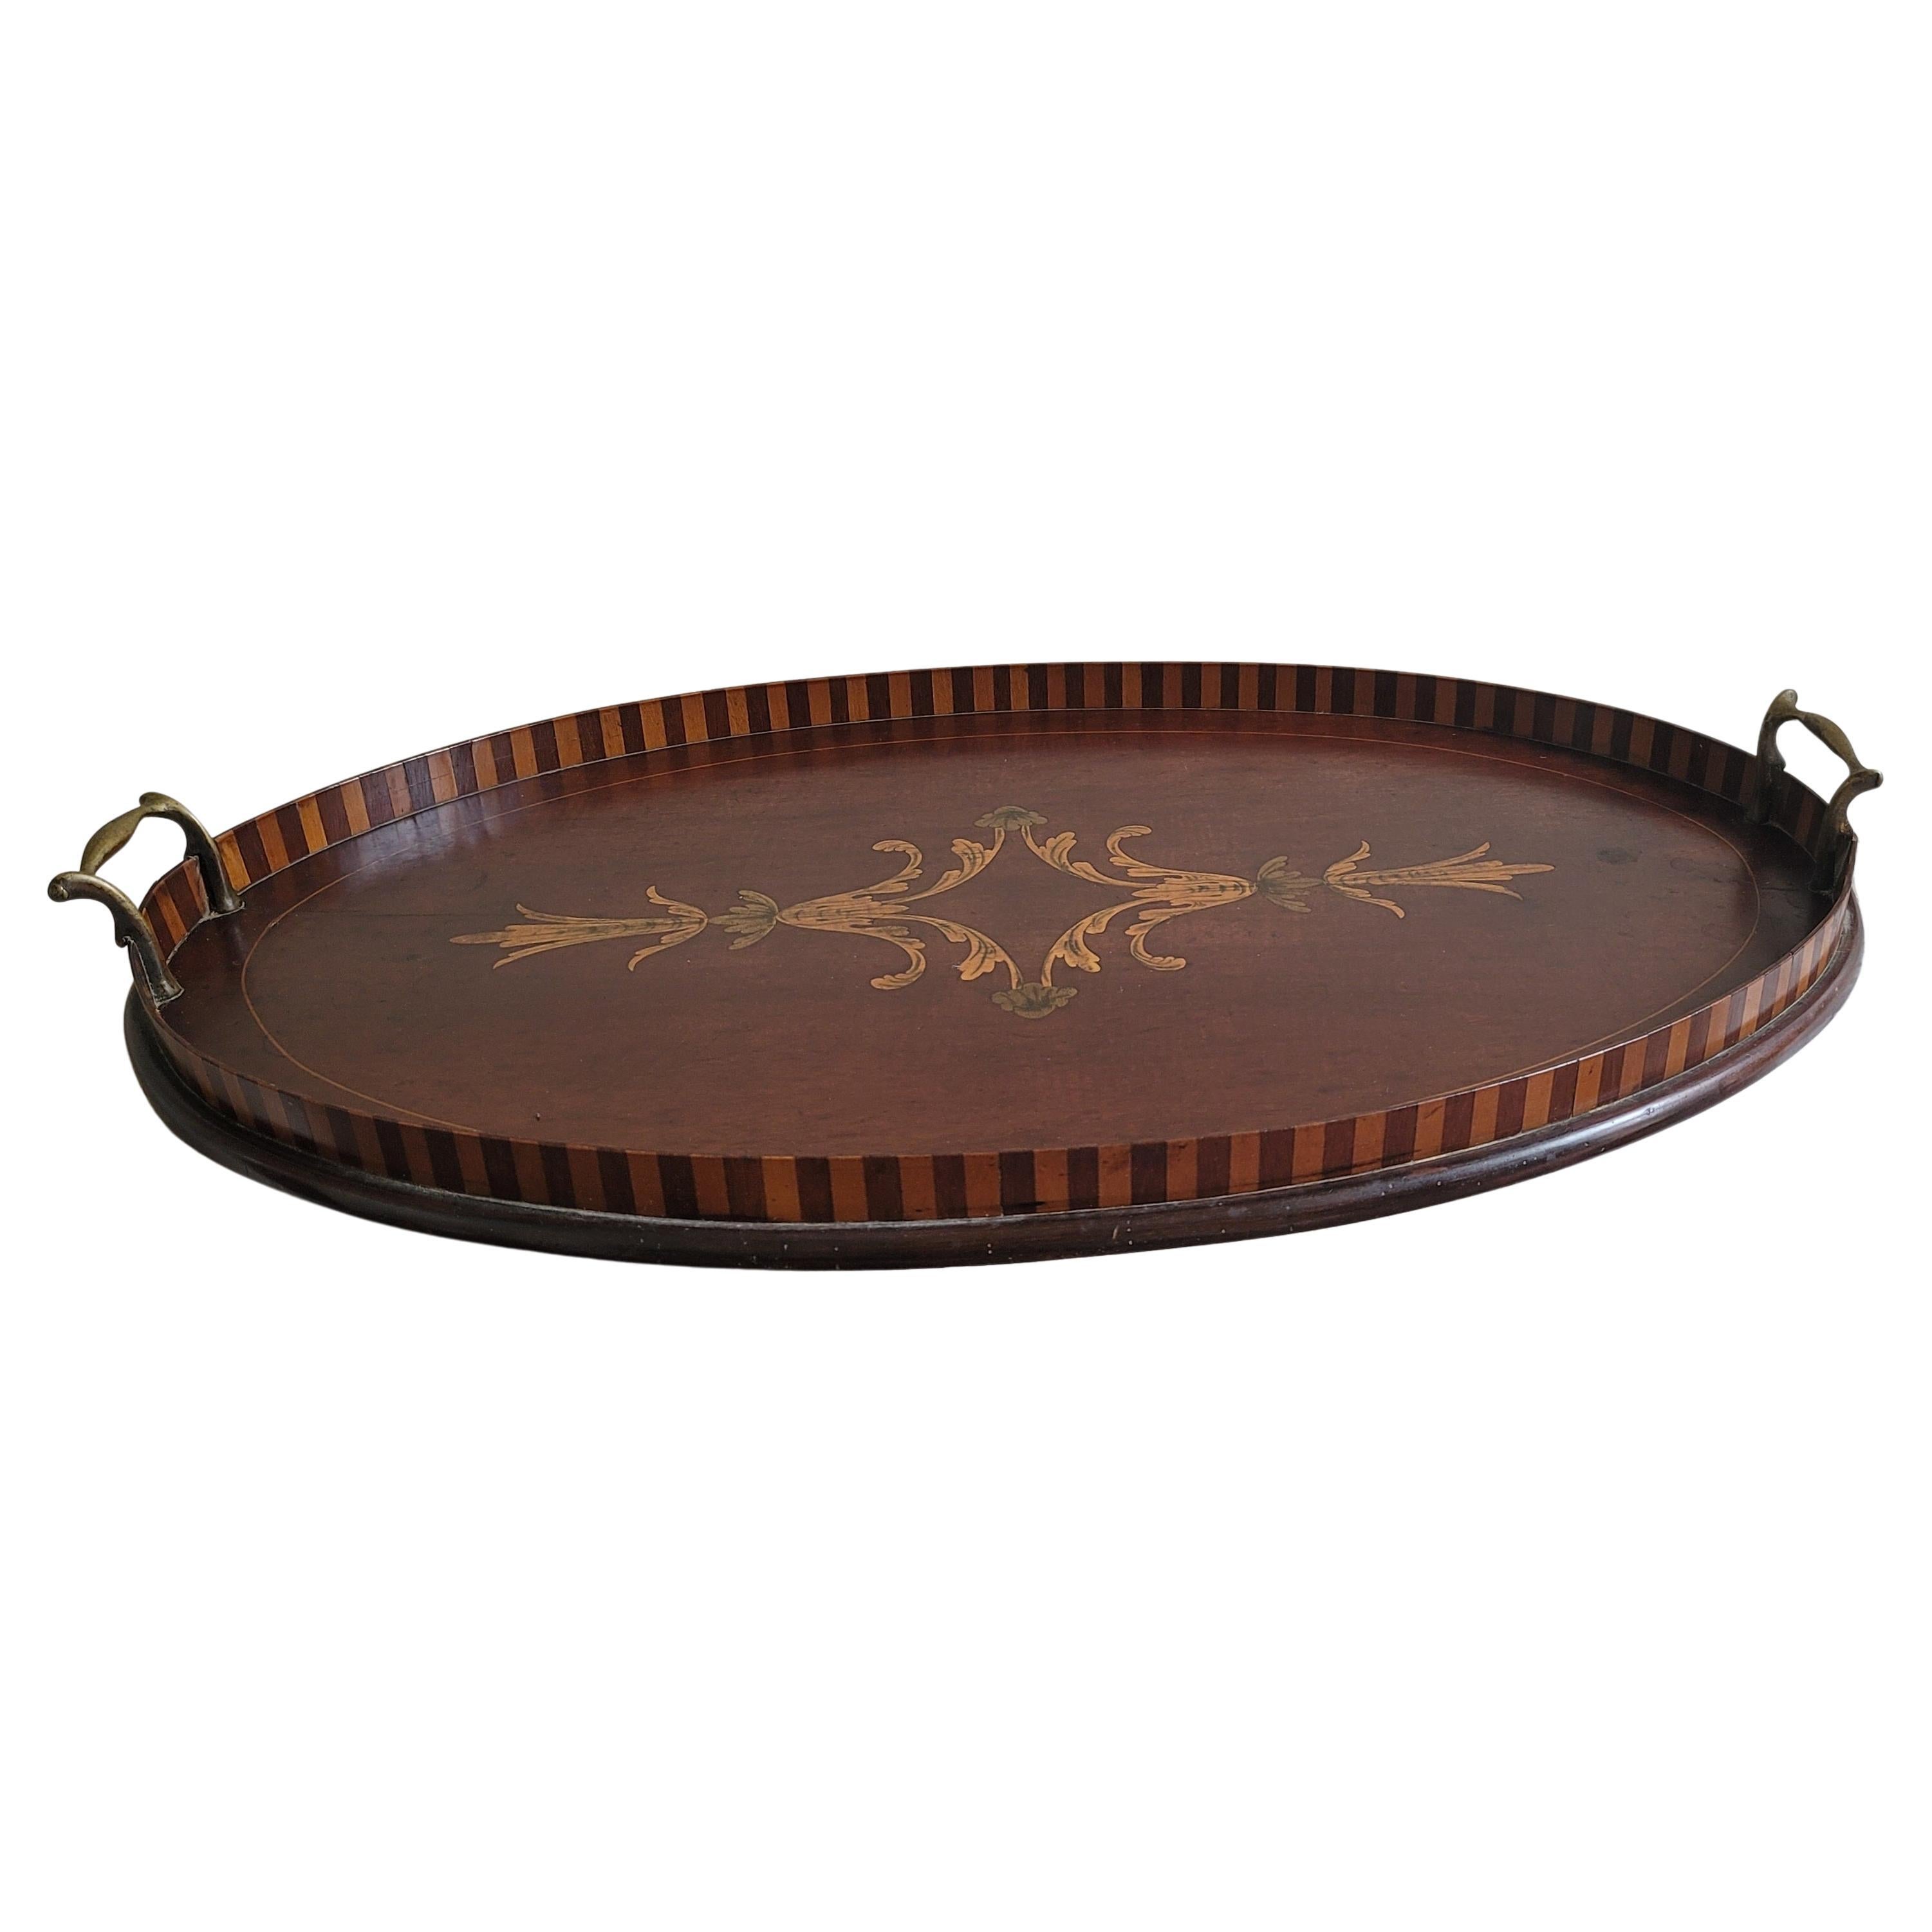 Large-Scaled, Finely Inlaid George III Victorian Mahogany Oval Butler's Tray In Good Condition For Sale In Germantown, MD